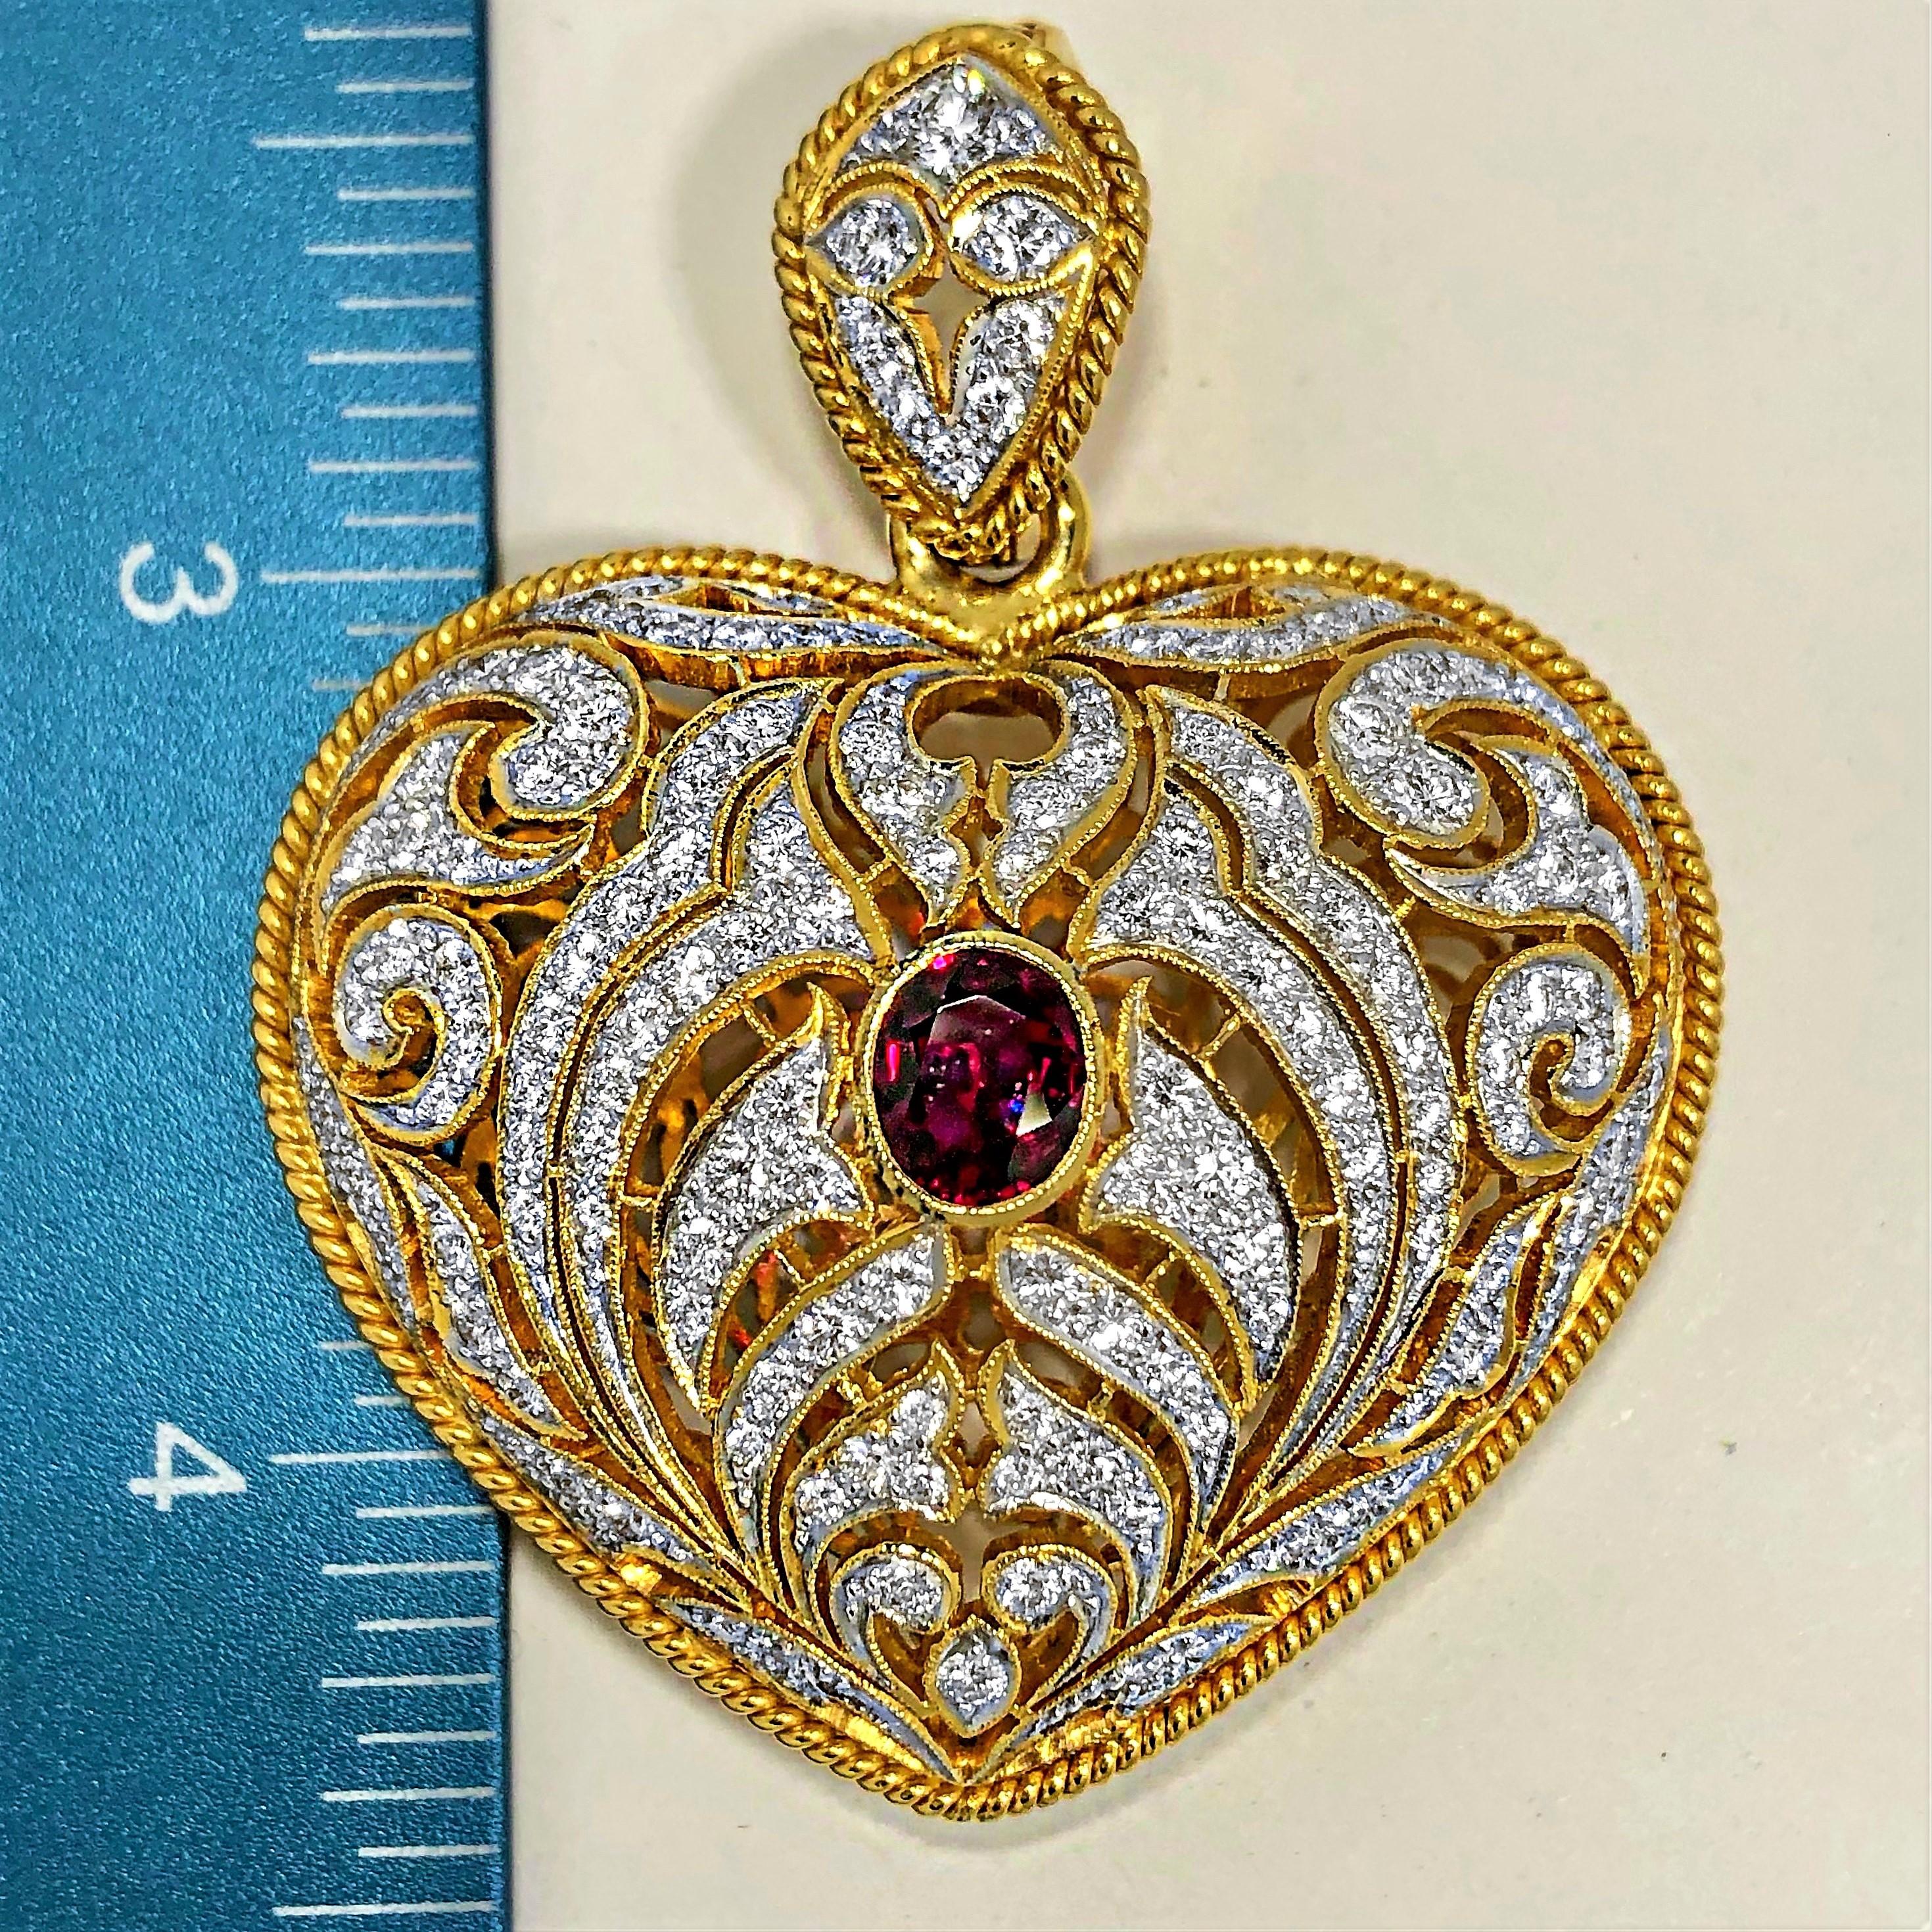 Brilliant Cut Large Gold Hand Pierced Diamond Encrusted Puffed Heart Pendant with Ruby Center For Sale